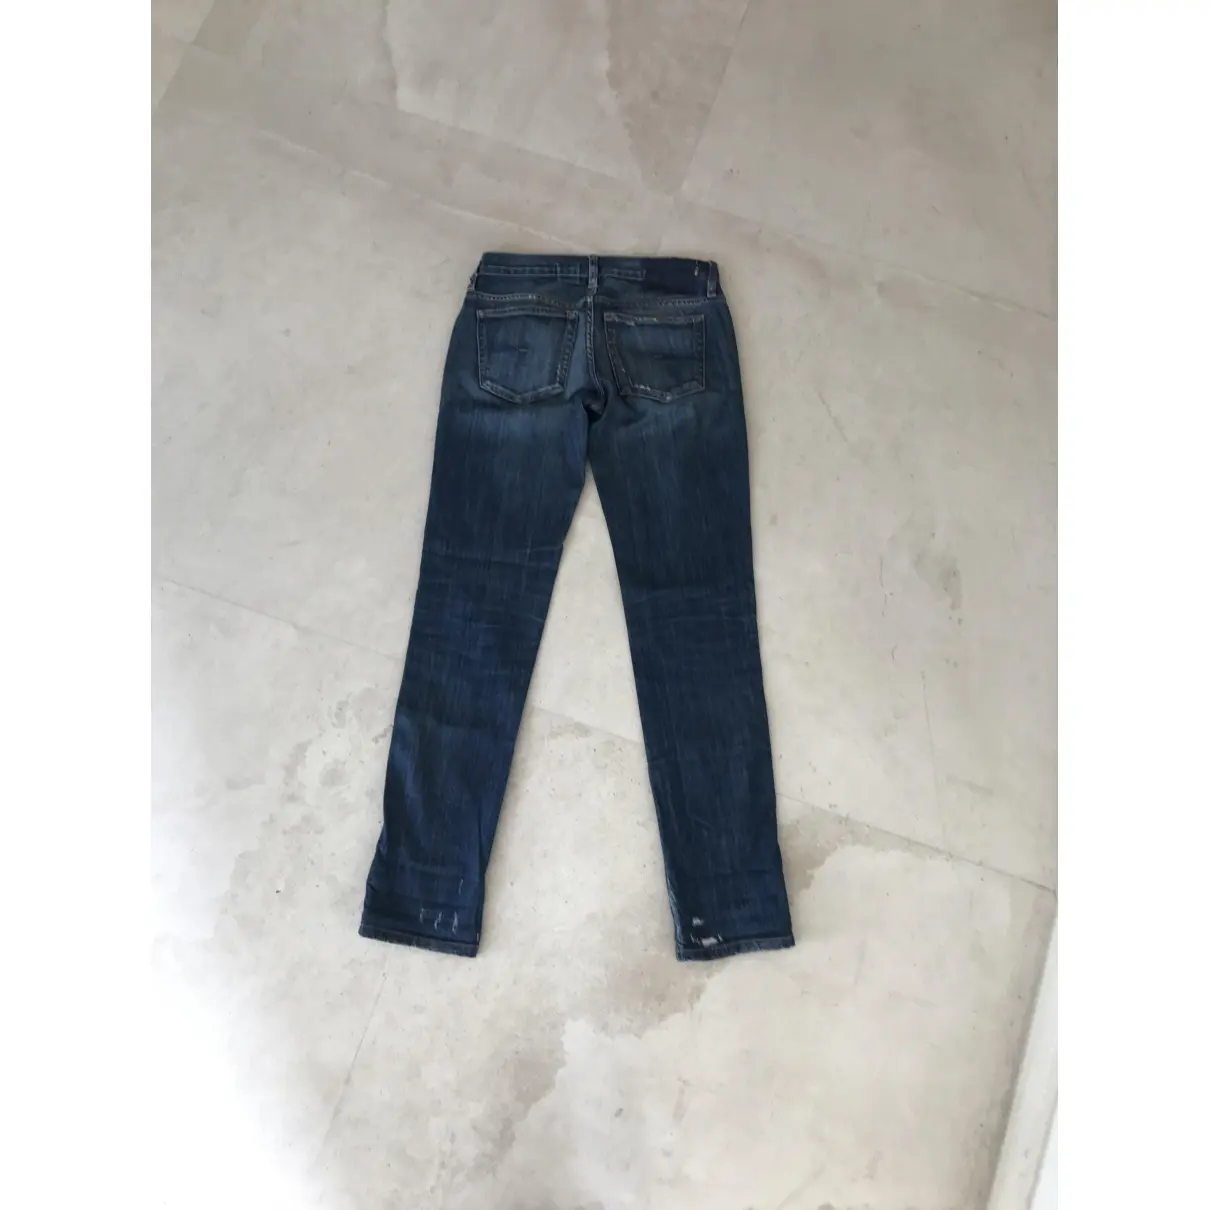 Mauro Grifoni Slim jeans for sale